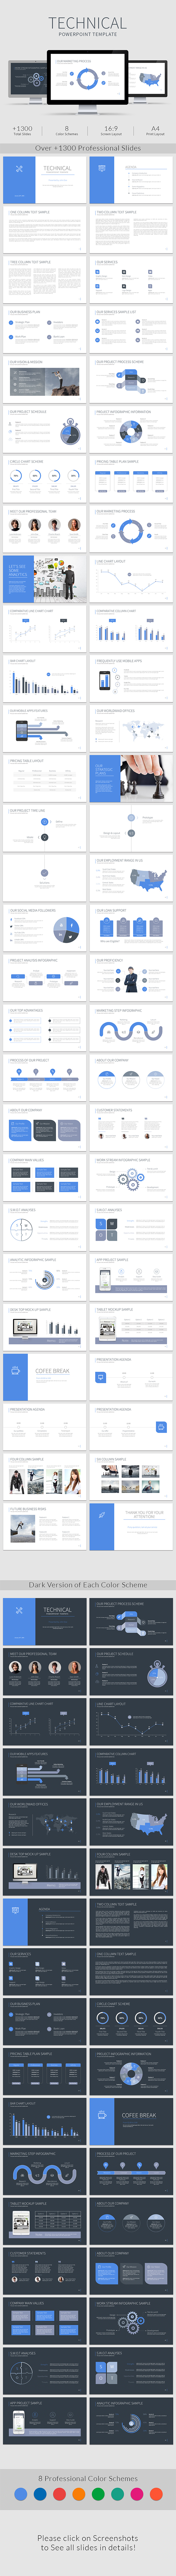 Technical PowerPoint Template